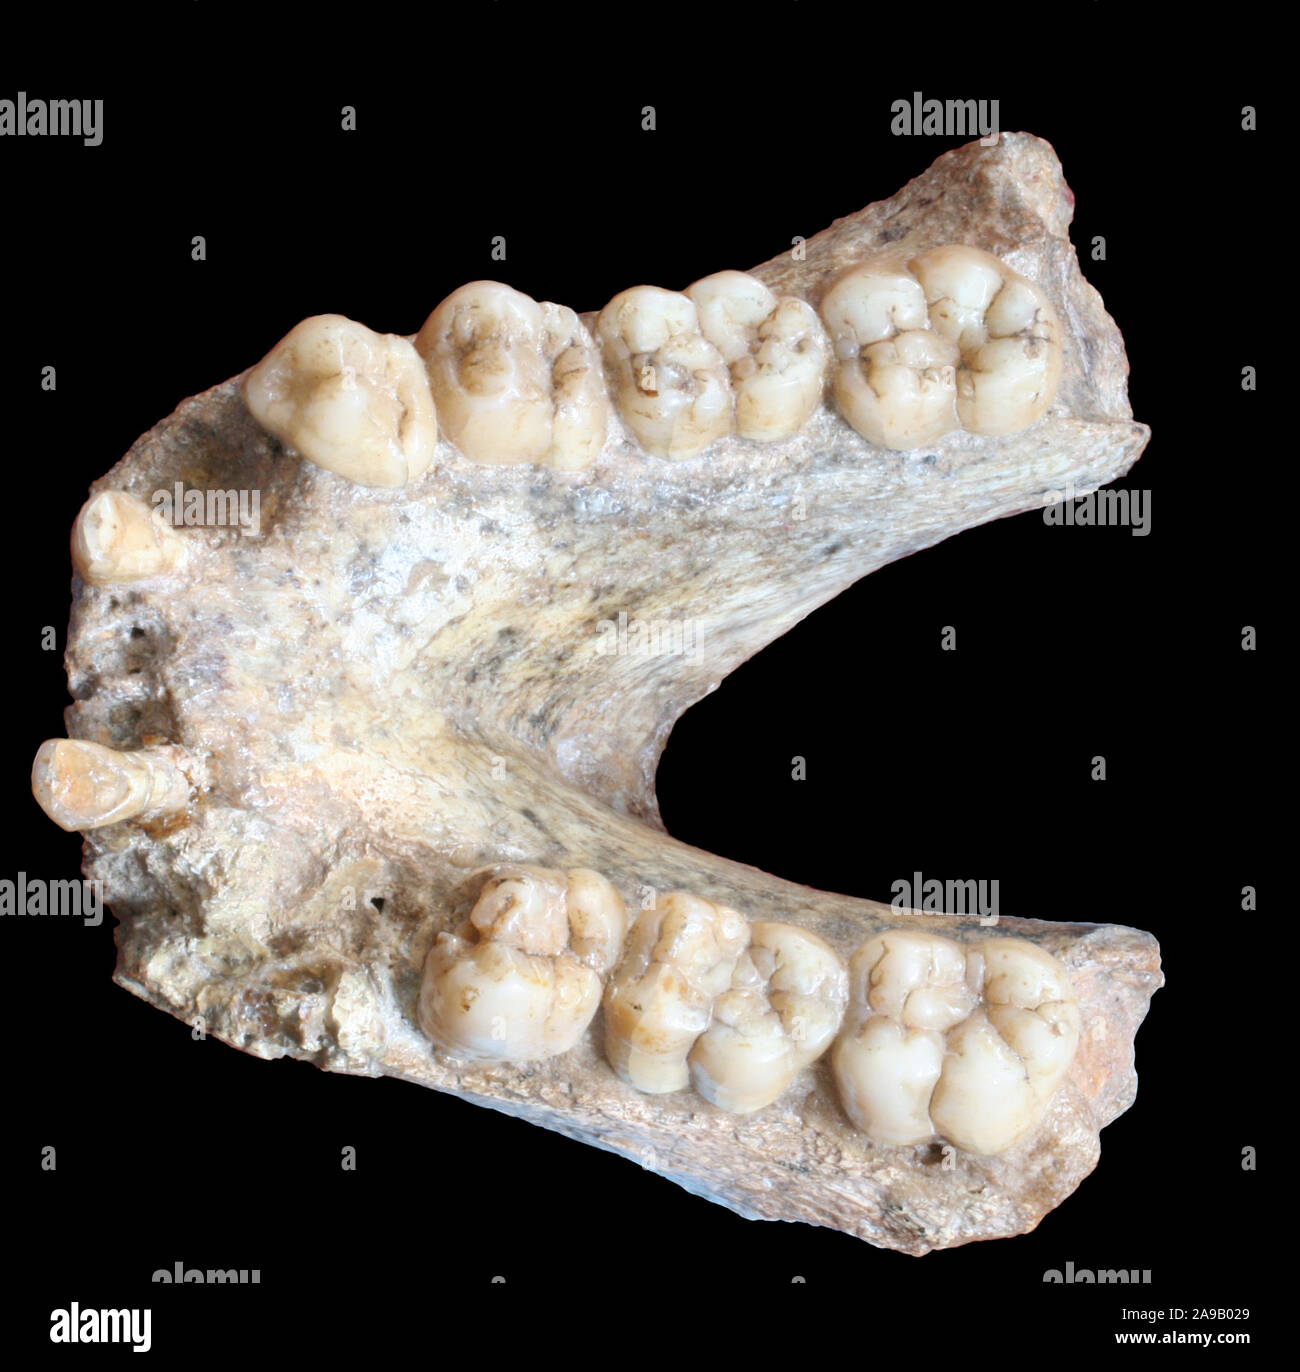 (191114) -- NANNING, Nov. 14, 2019 (Xinhua) -- Undated file photo shows a 1.9-million-year-old fossil of mandible of Gigantopithecus blacki found in a cave in Tiandong County of south China's Guangxi Zhuang Autonomous Region. Chinese and Danish scientists have successfully retrieved genetic materials from a 1.9-million-year-old fossil of Gigantopithecus blacki, a species of great ape.    The finding, published in a paper on the journal Nature on Wednesday, marks the first time that such ancient protein evidence from fossils in the subtropics was retrieved. Scientists said it sheds new light on Stock Photo